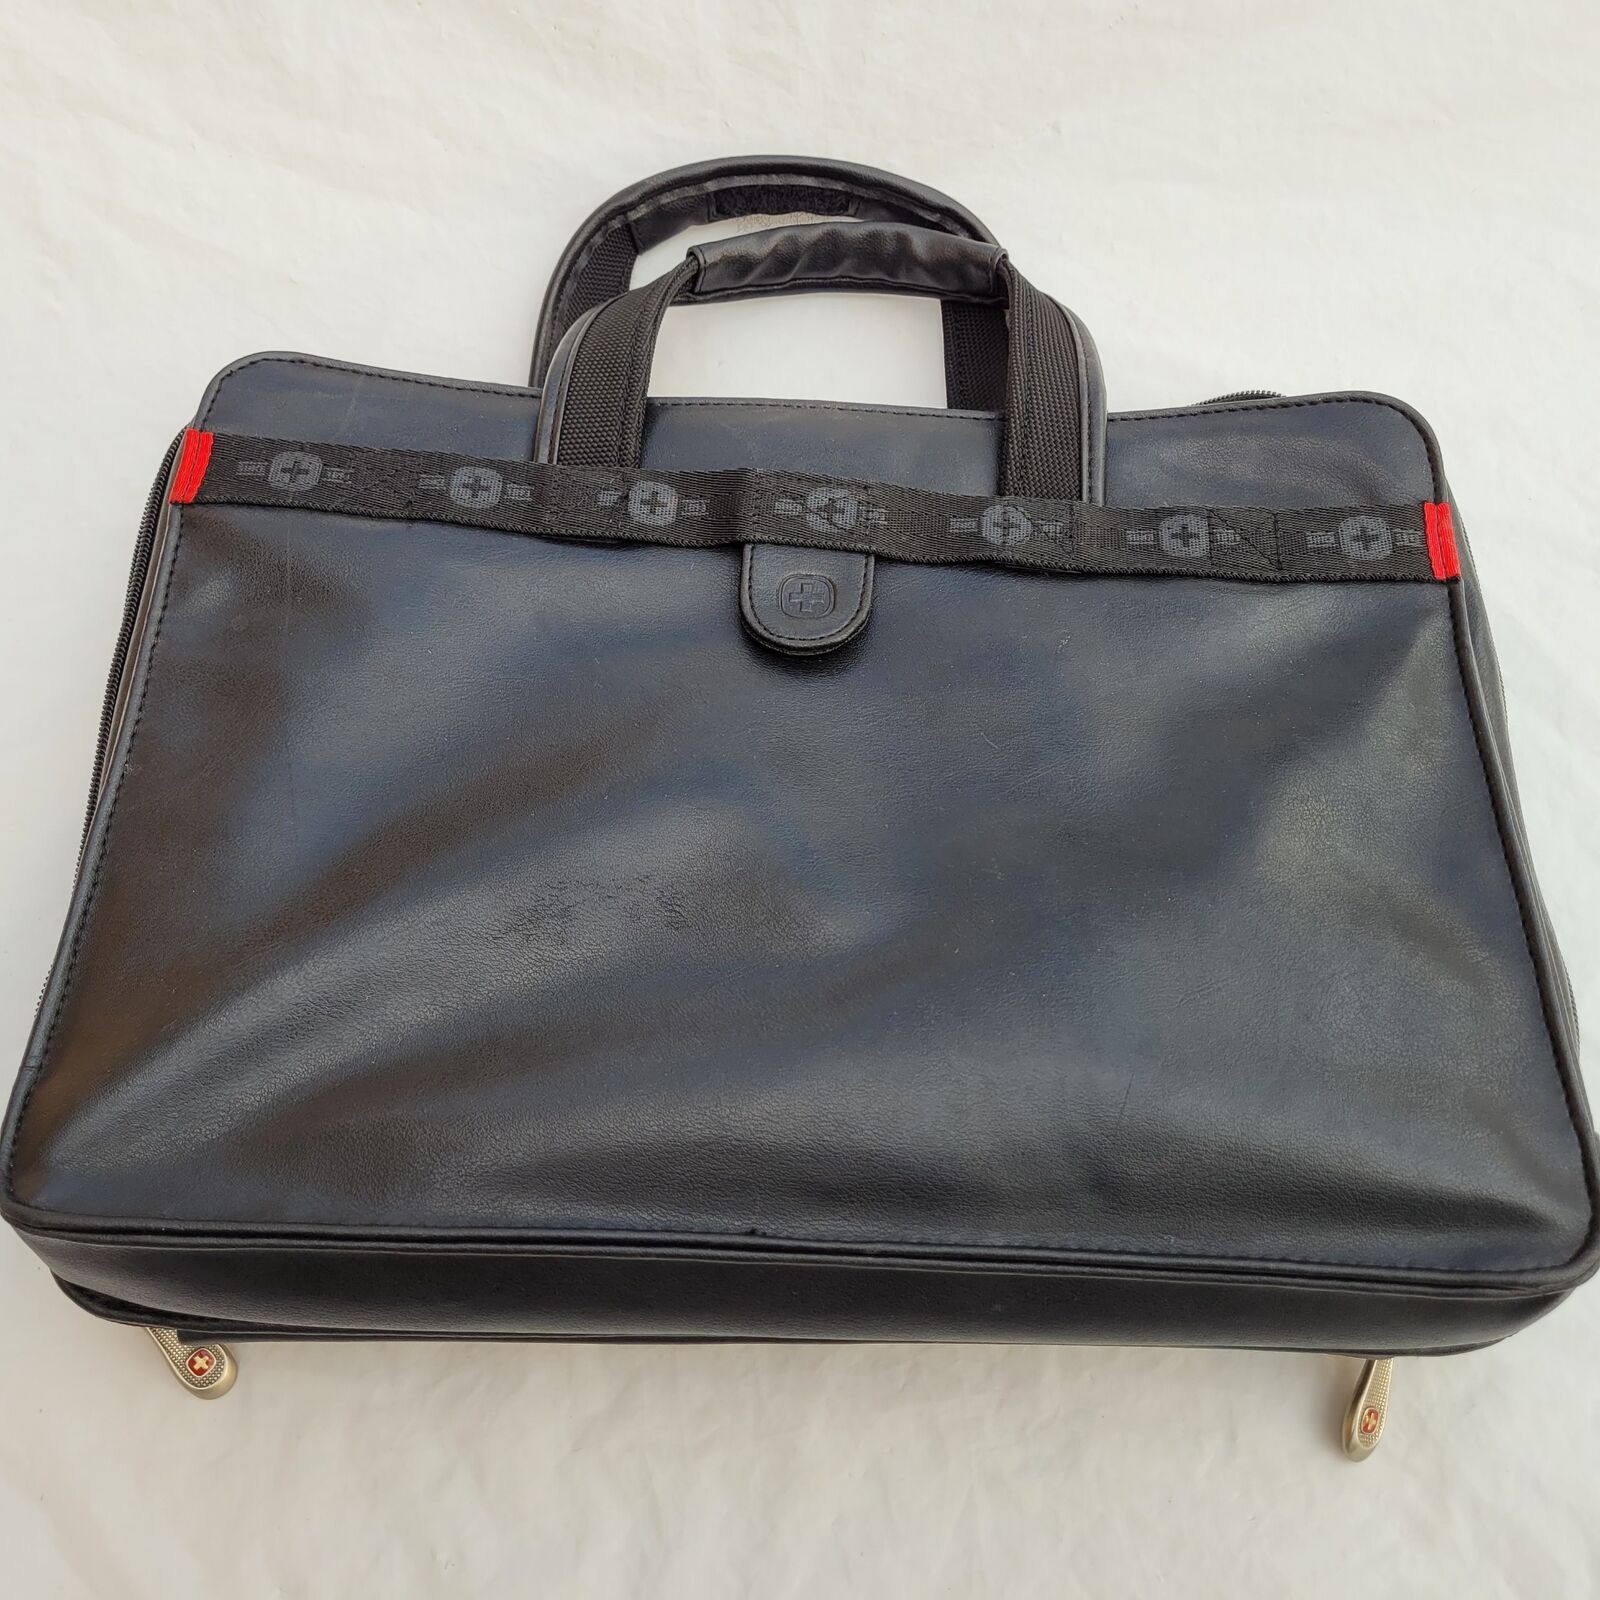 Swiss Gear Wenger Black Leather 15 inch Pro Folio Briefcase with Calculator